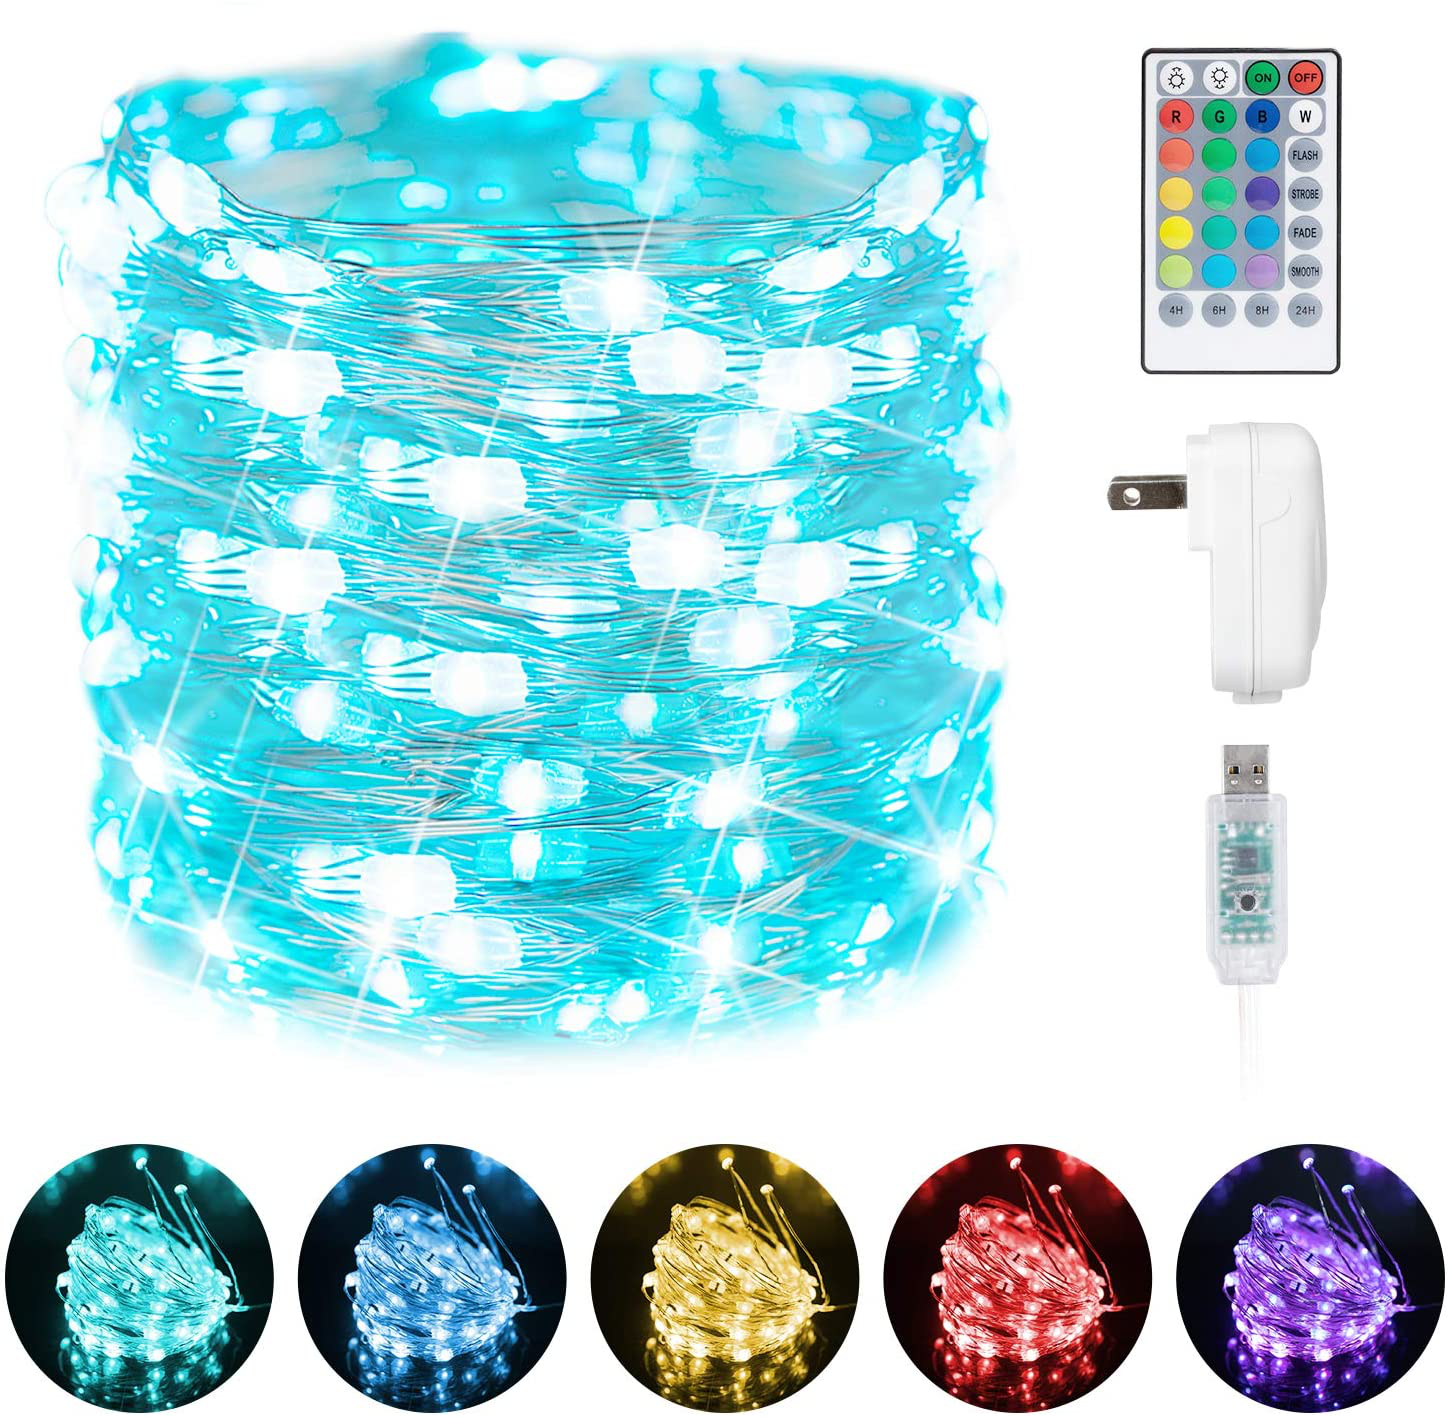 Color Changing Fairy String Lights: 66 Feet 200 Led Waterproof Twinkle Lights with Remote and Plug and 4 Light Modes for Craft Bedroom Ceiling Wedding Christmas 16 Colors